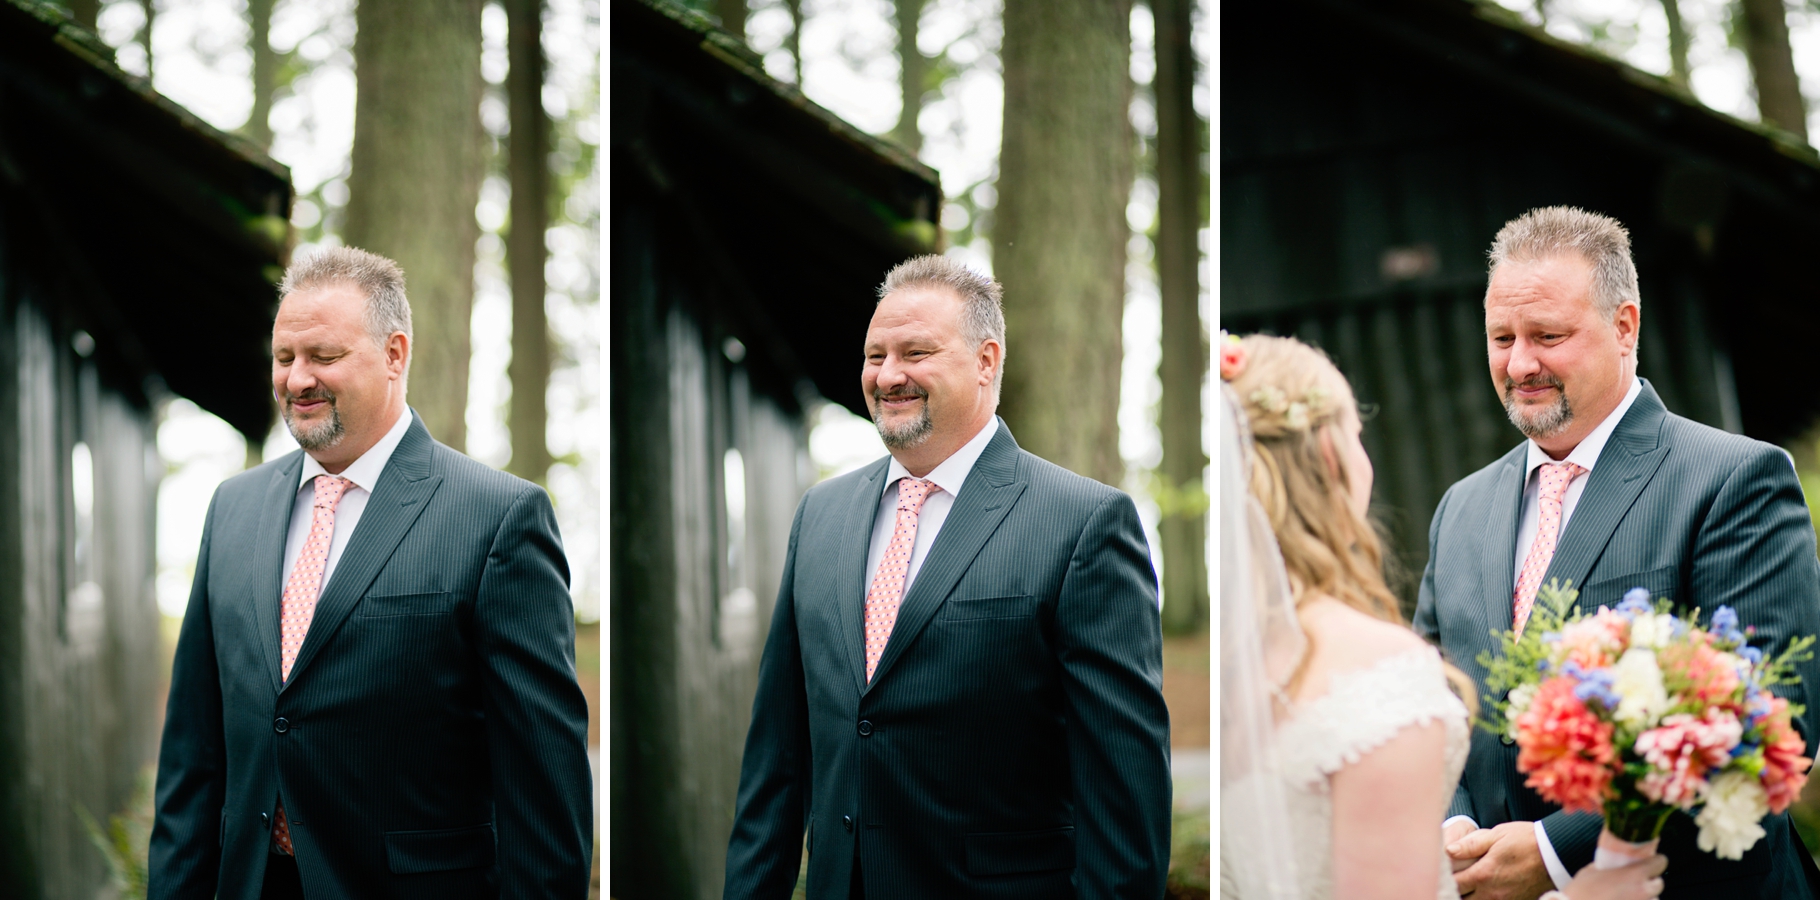 15-Dad-Father-of-Bride-First-Look-Bridal-Portraits-wooded-bluff-olympic-mountains-log-cabin-Kitsap-Memorial-State-Park-Forest-Northwest-Photographer-Seattle-Wedding-Photography-by-Betty-Elaine